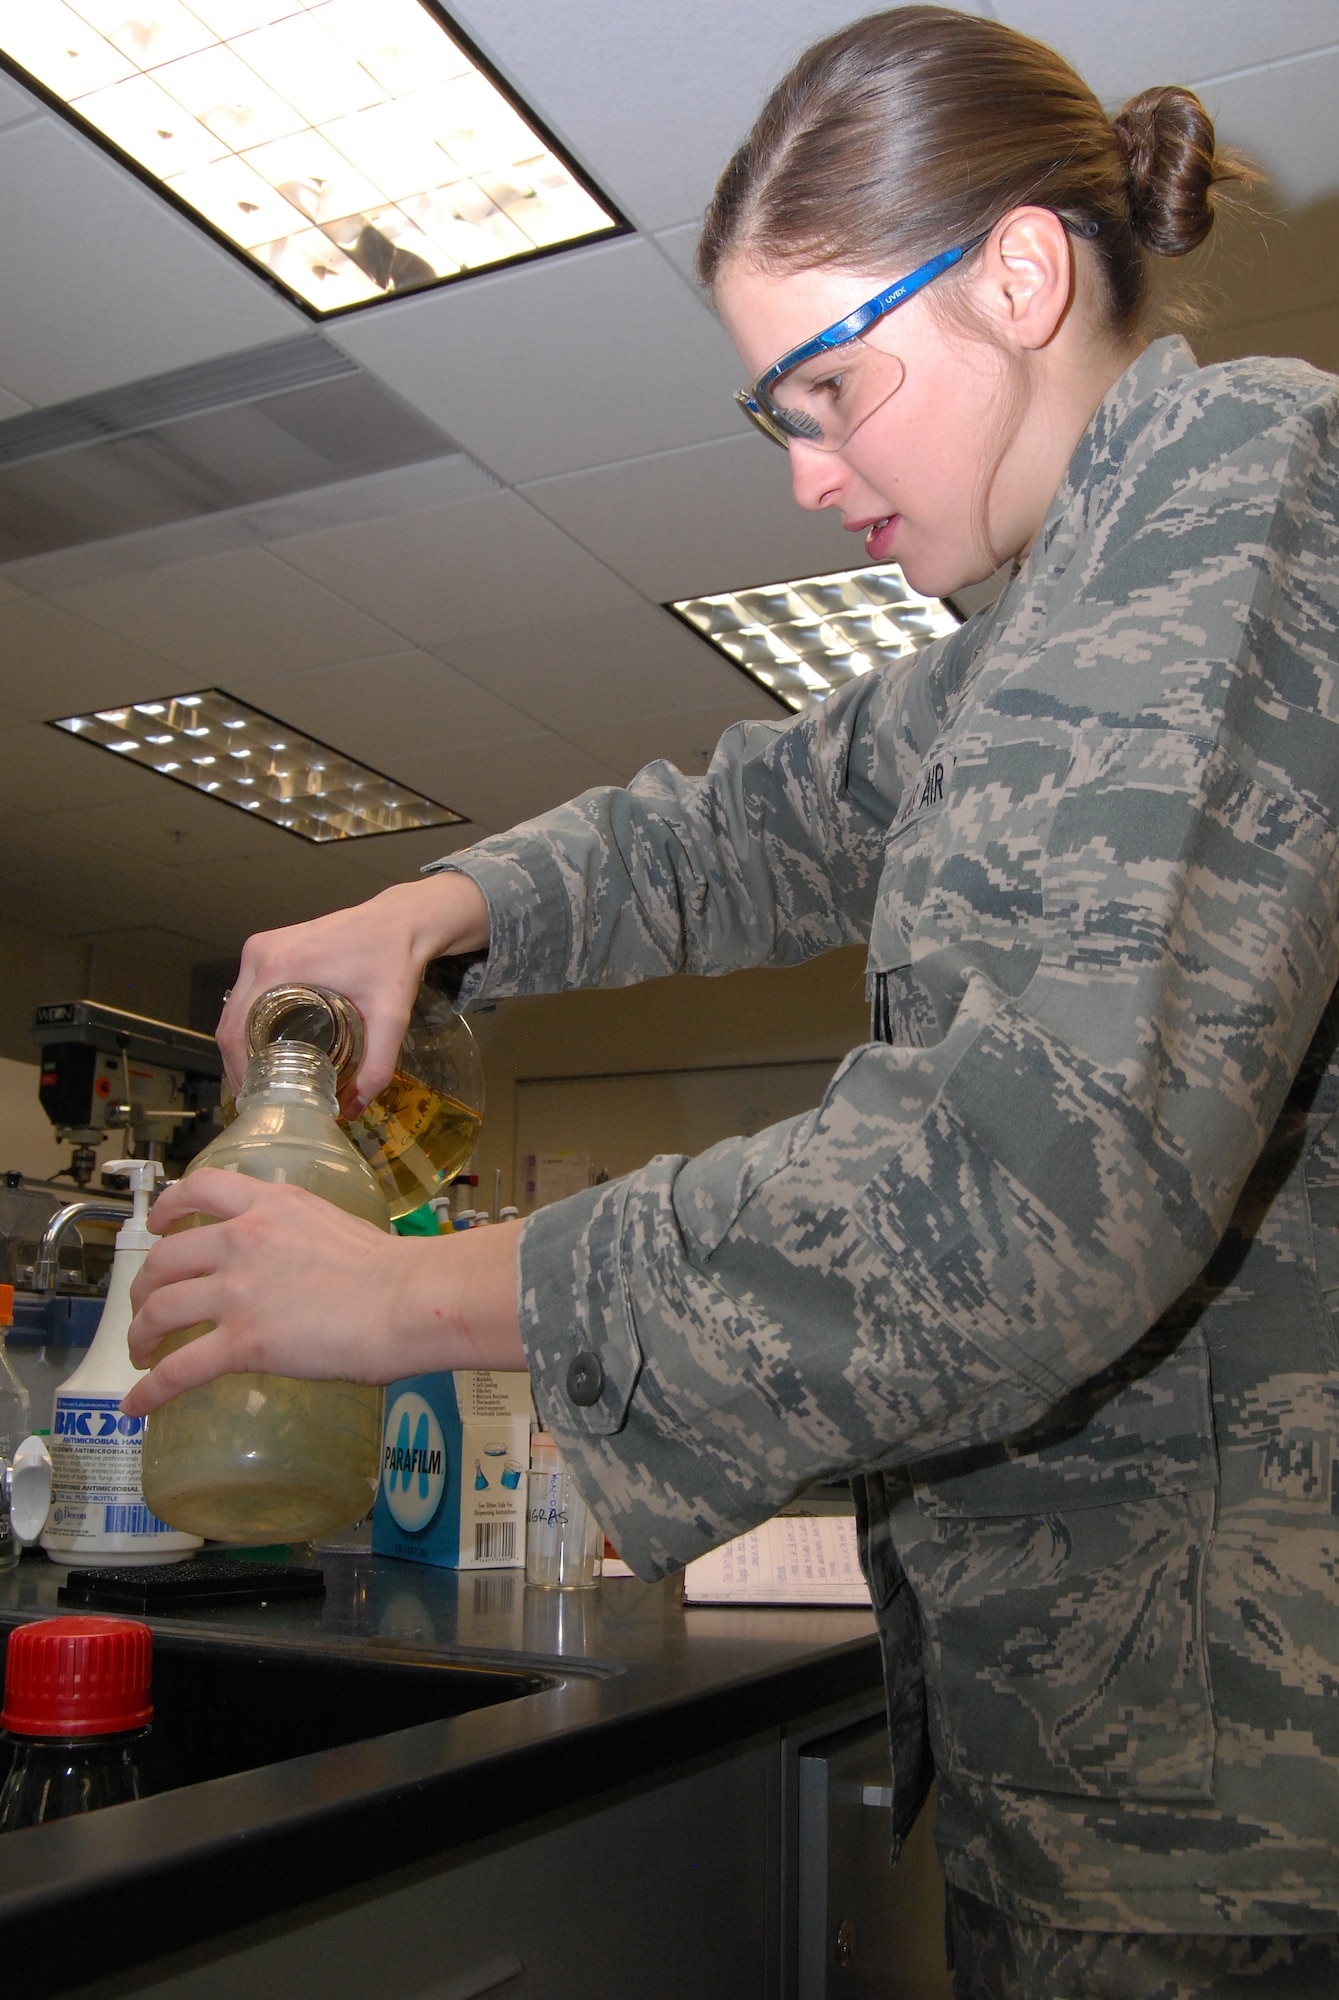 Cadet 1st Class Alexa Gingras prepares a lysogeny broth during her biochemistry lab Feb. 13, 2013. The broth is used to grow bacteria, which Gingras uses to produce fluorescent proteins for her research, which involves getting fluorescent proteins to react to illegal drugs. Gingras is a native of Tucson, Ariz. (U.S. Air Force photo/Don Branum)